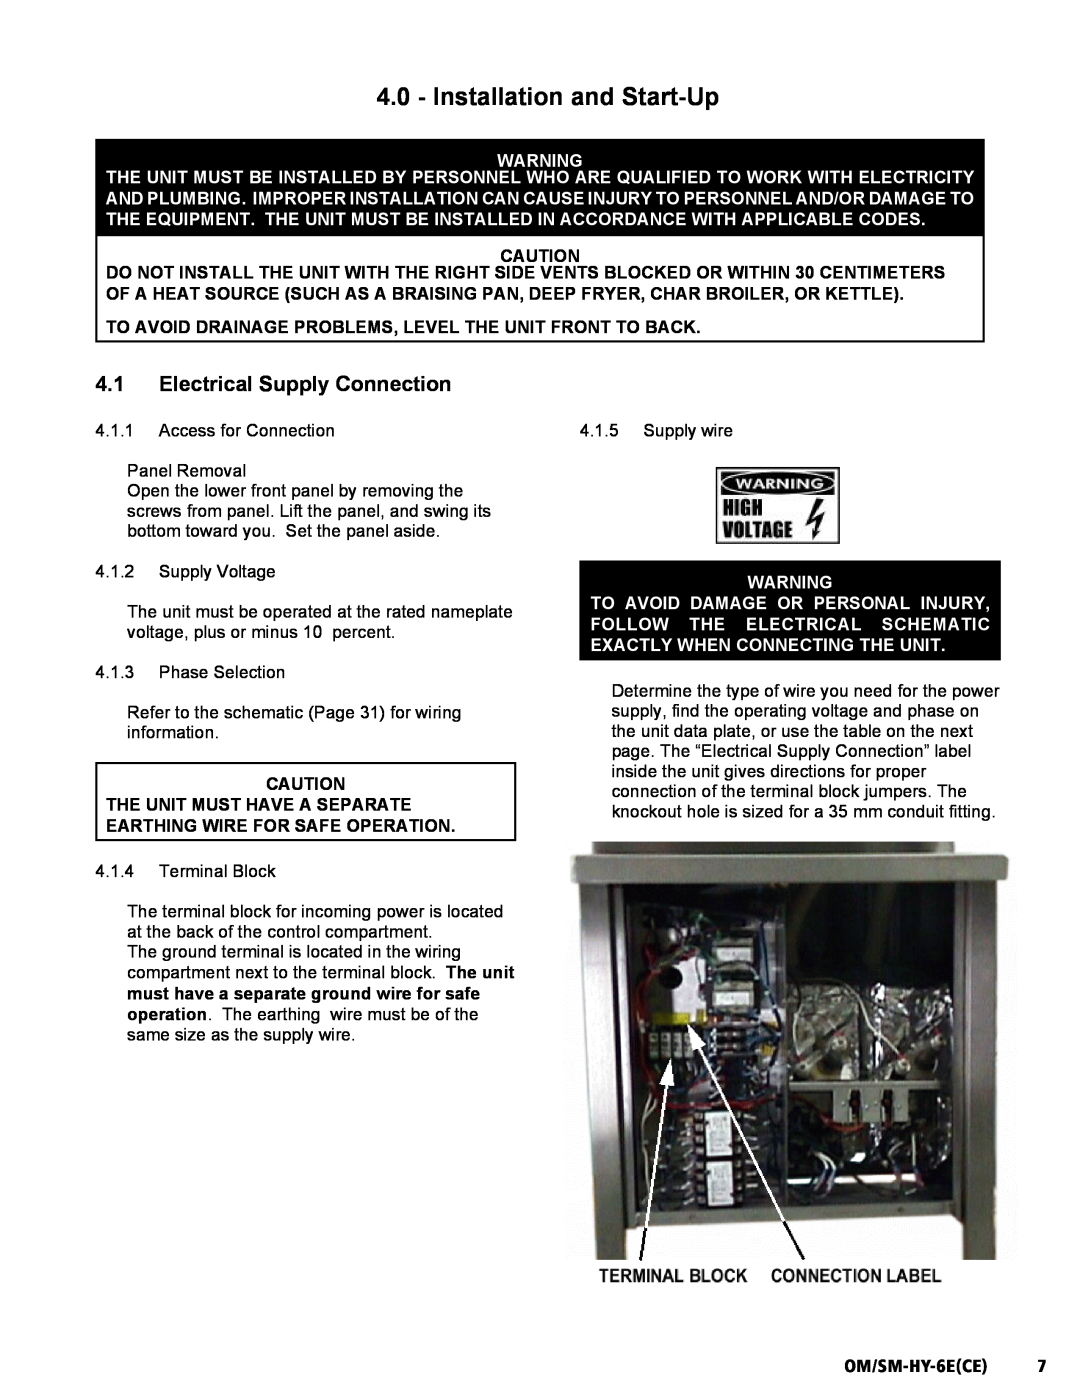 Unified Brands HY-6E(CE) service manual Installation and Start-Up, 4.1Electrical Supply Connection, OM/SM-HY-6ECE  